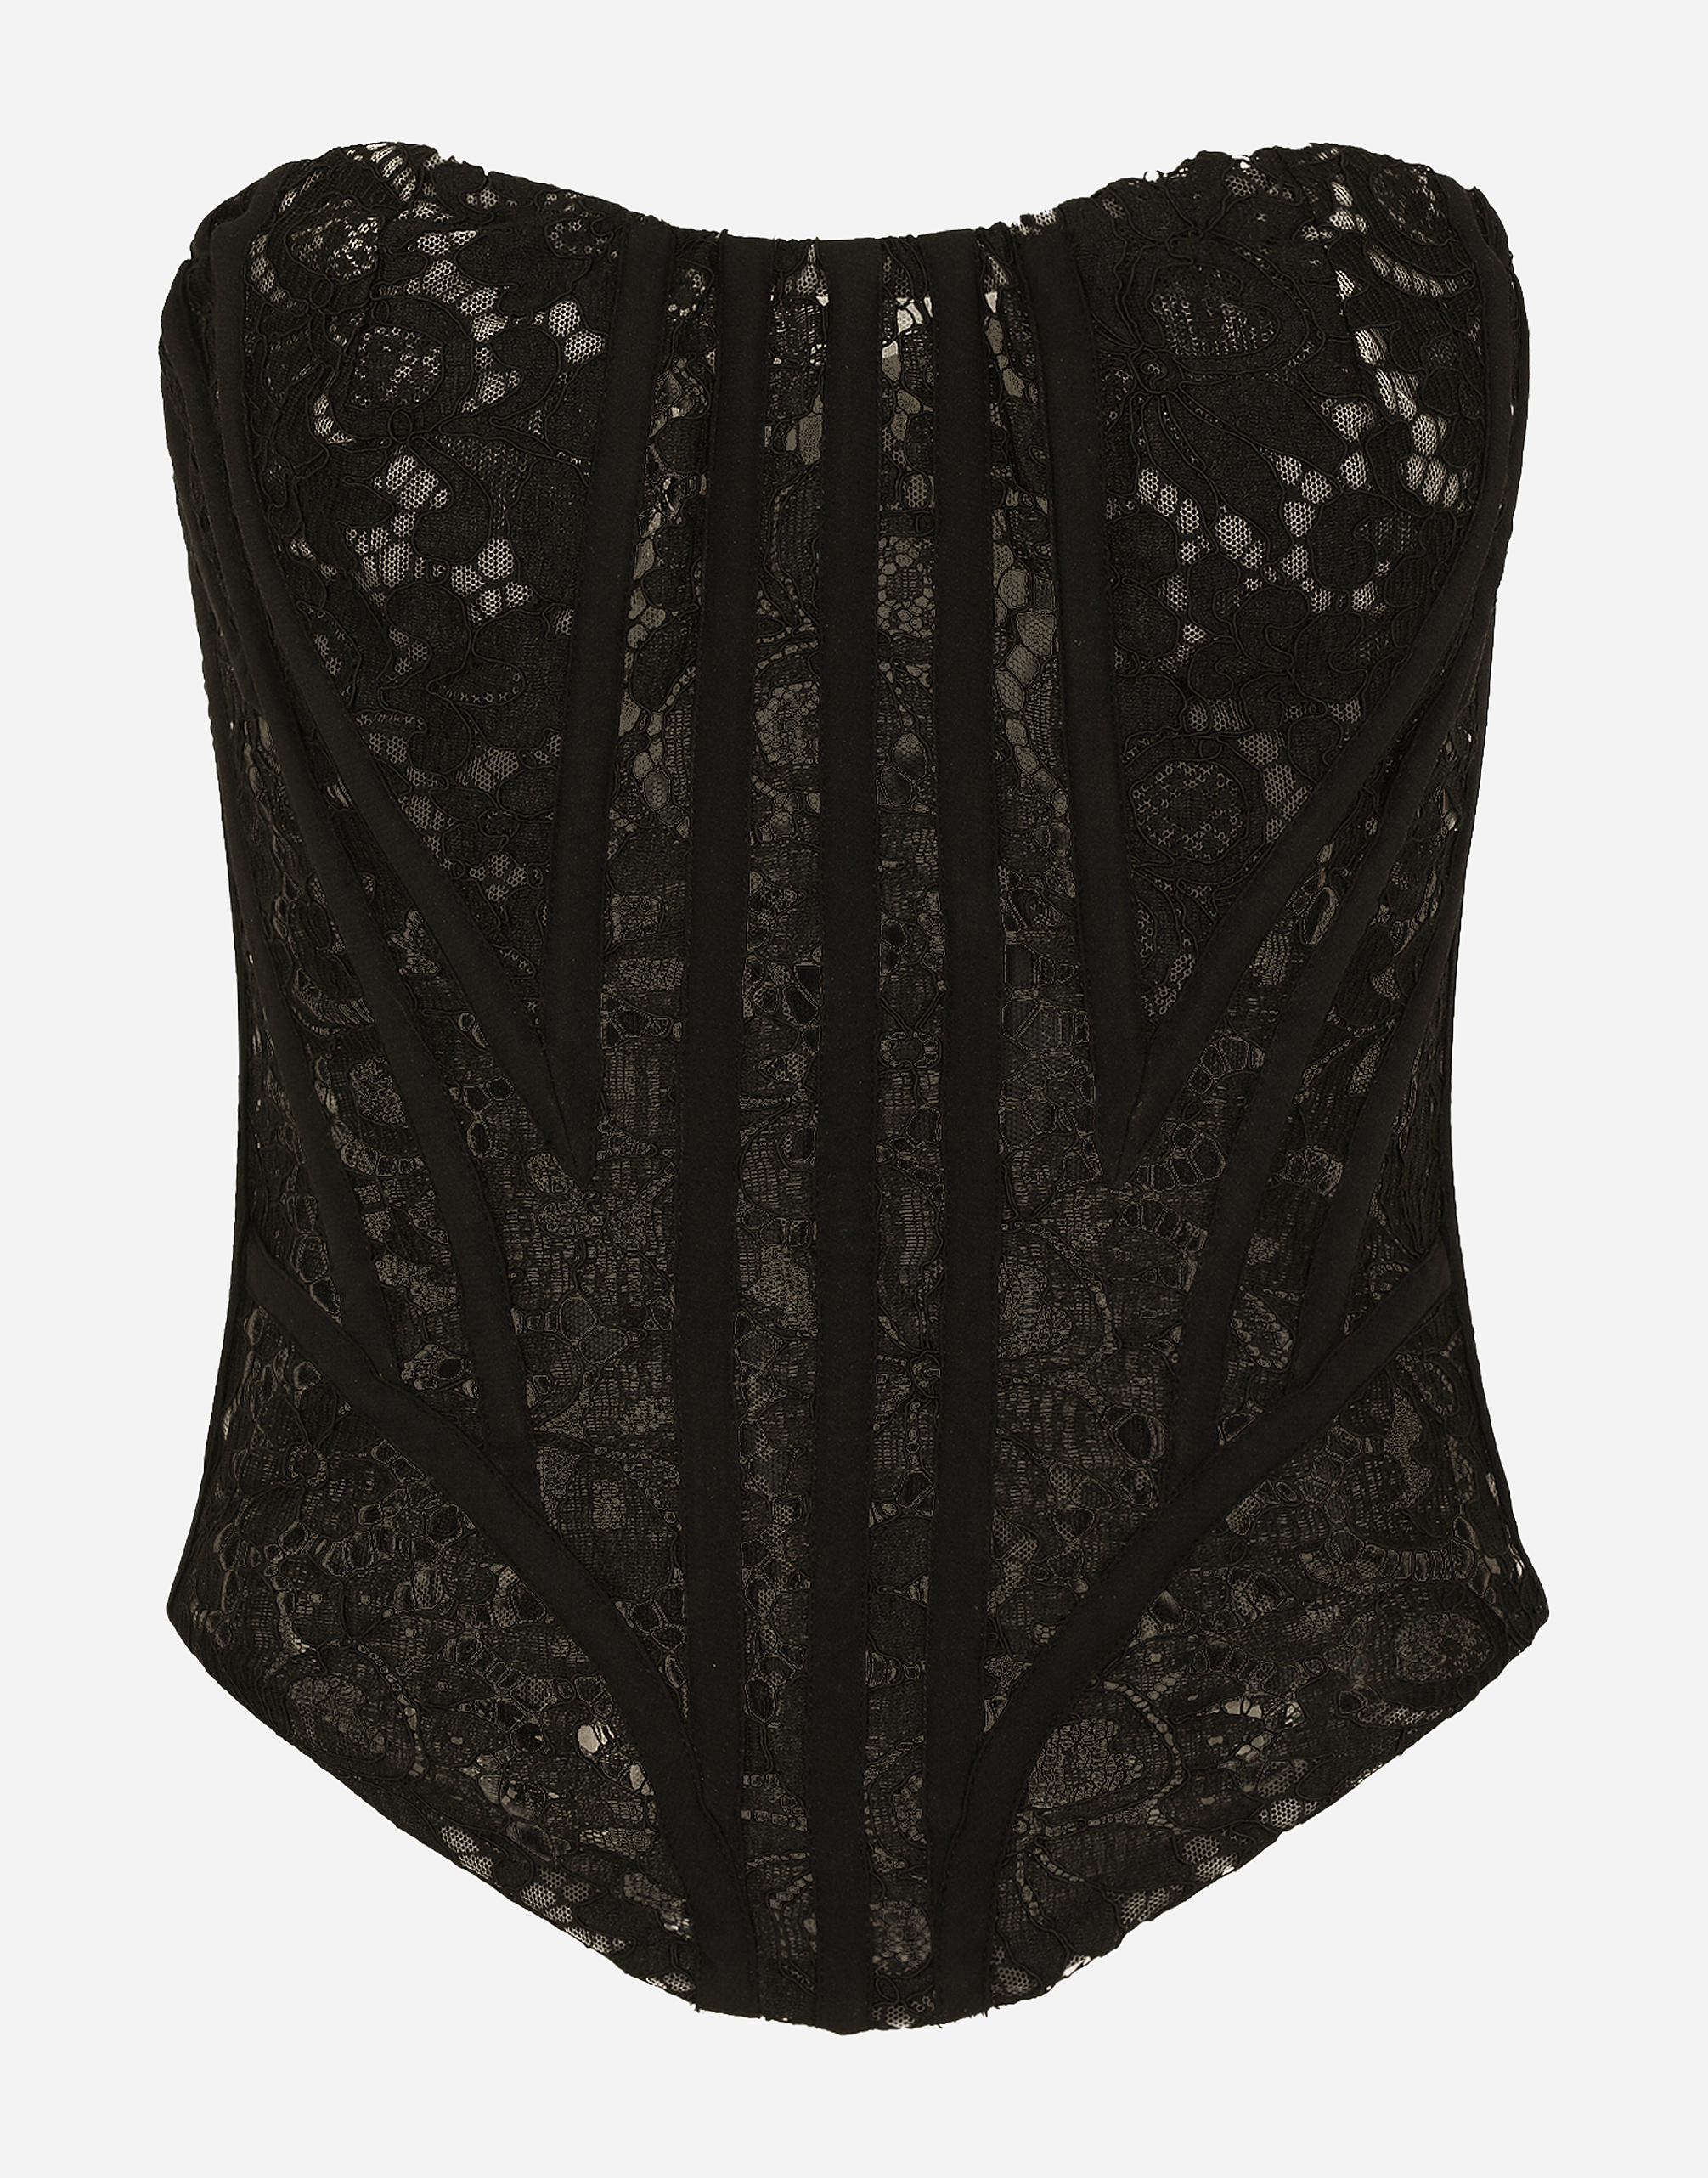 Lace bustier with laces and eyelets in Black